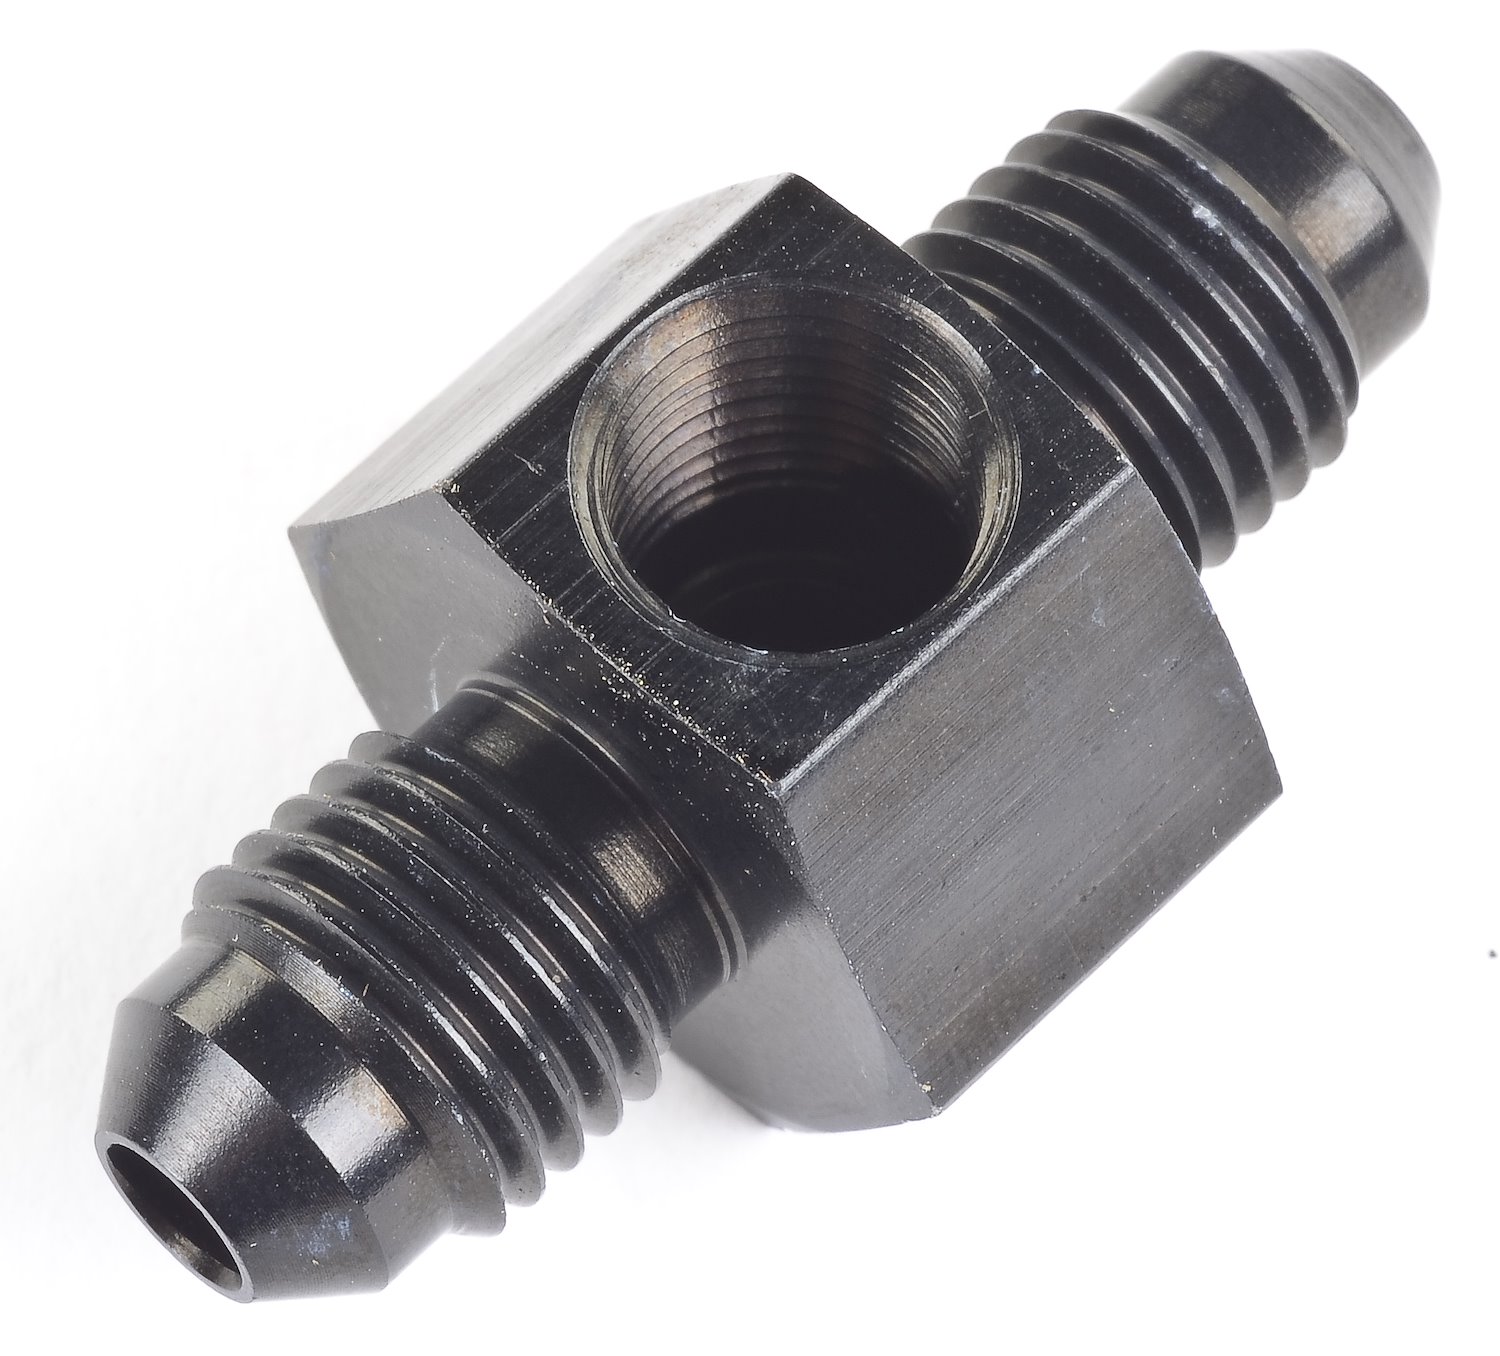 Fuel Pressure Adapter Fitting -4AN Union